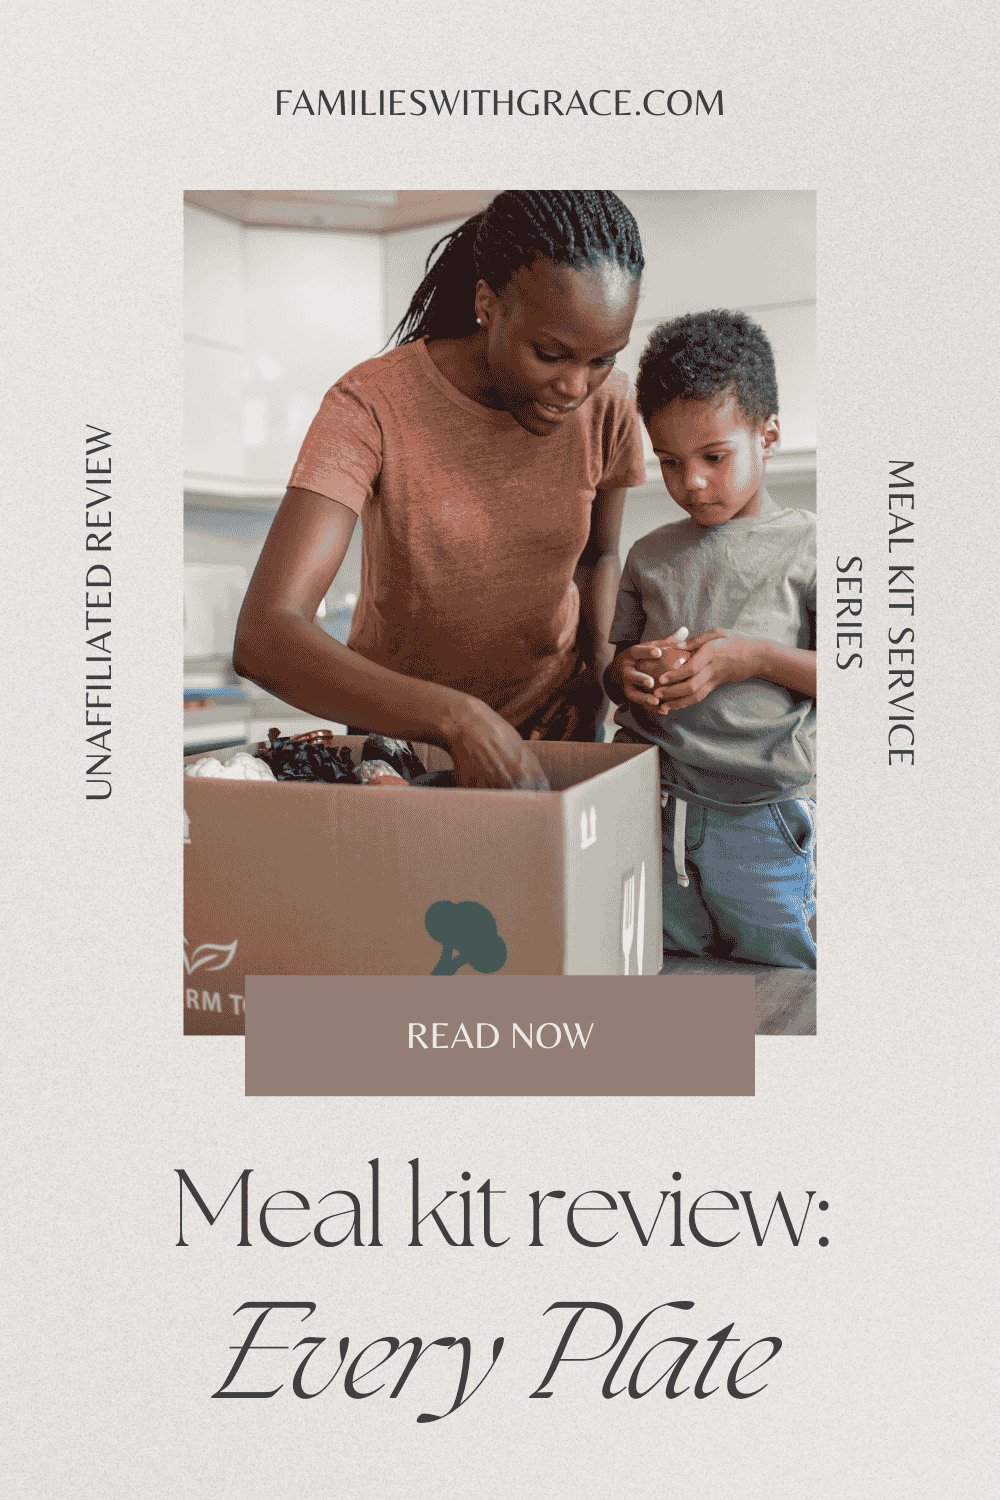 Meal kit review: Every Plate